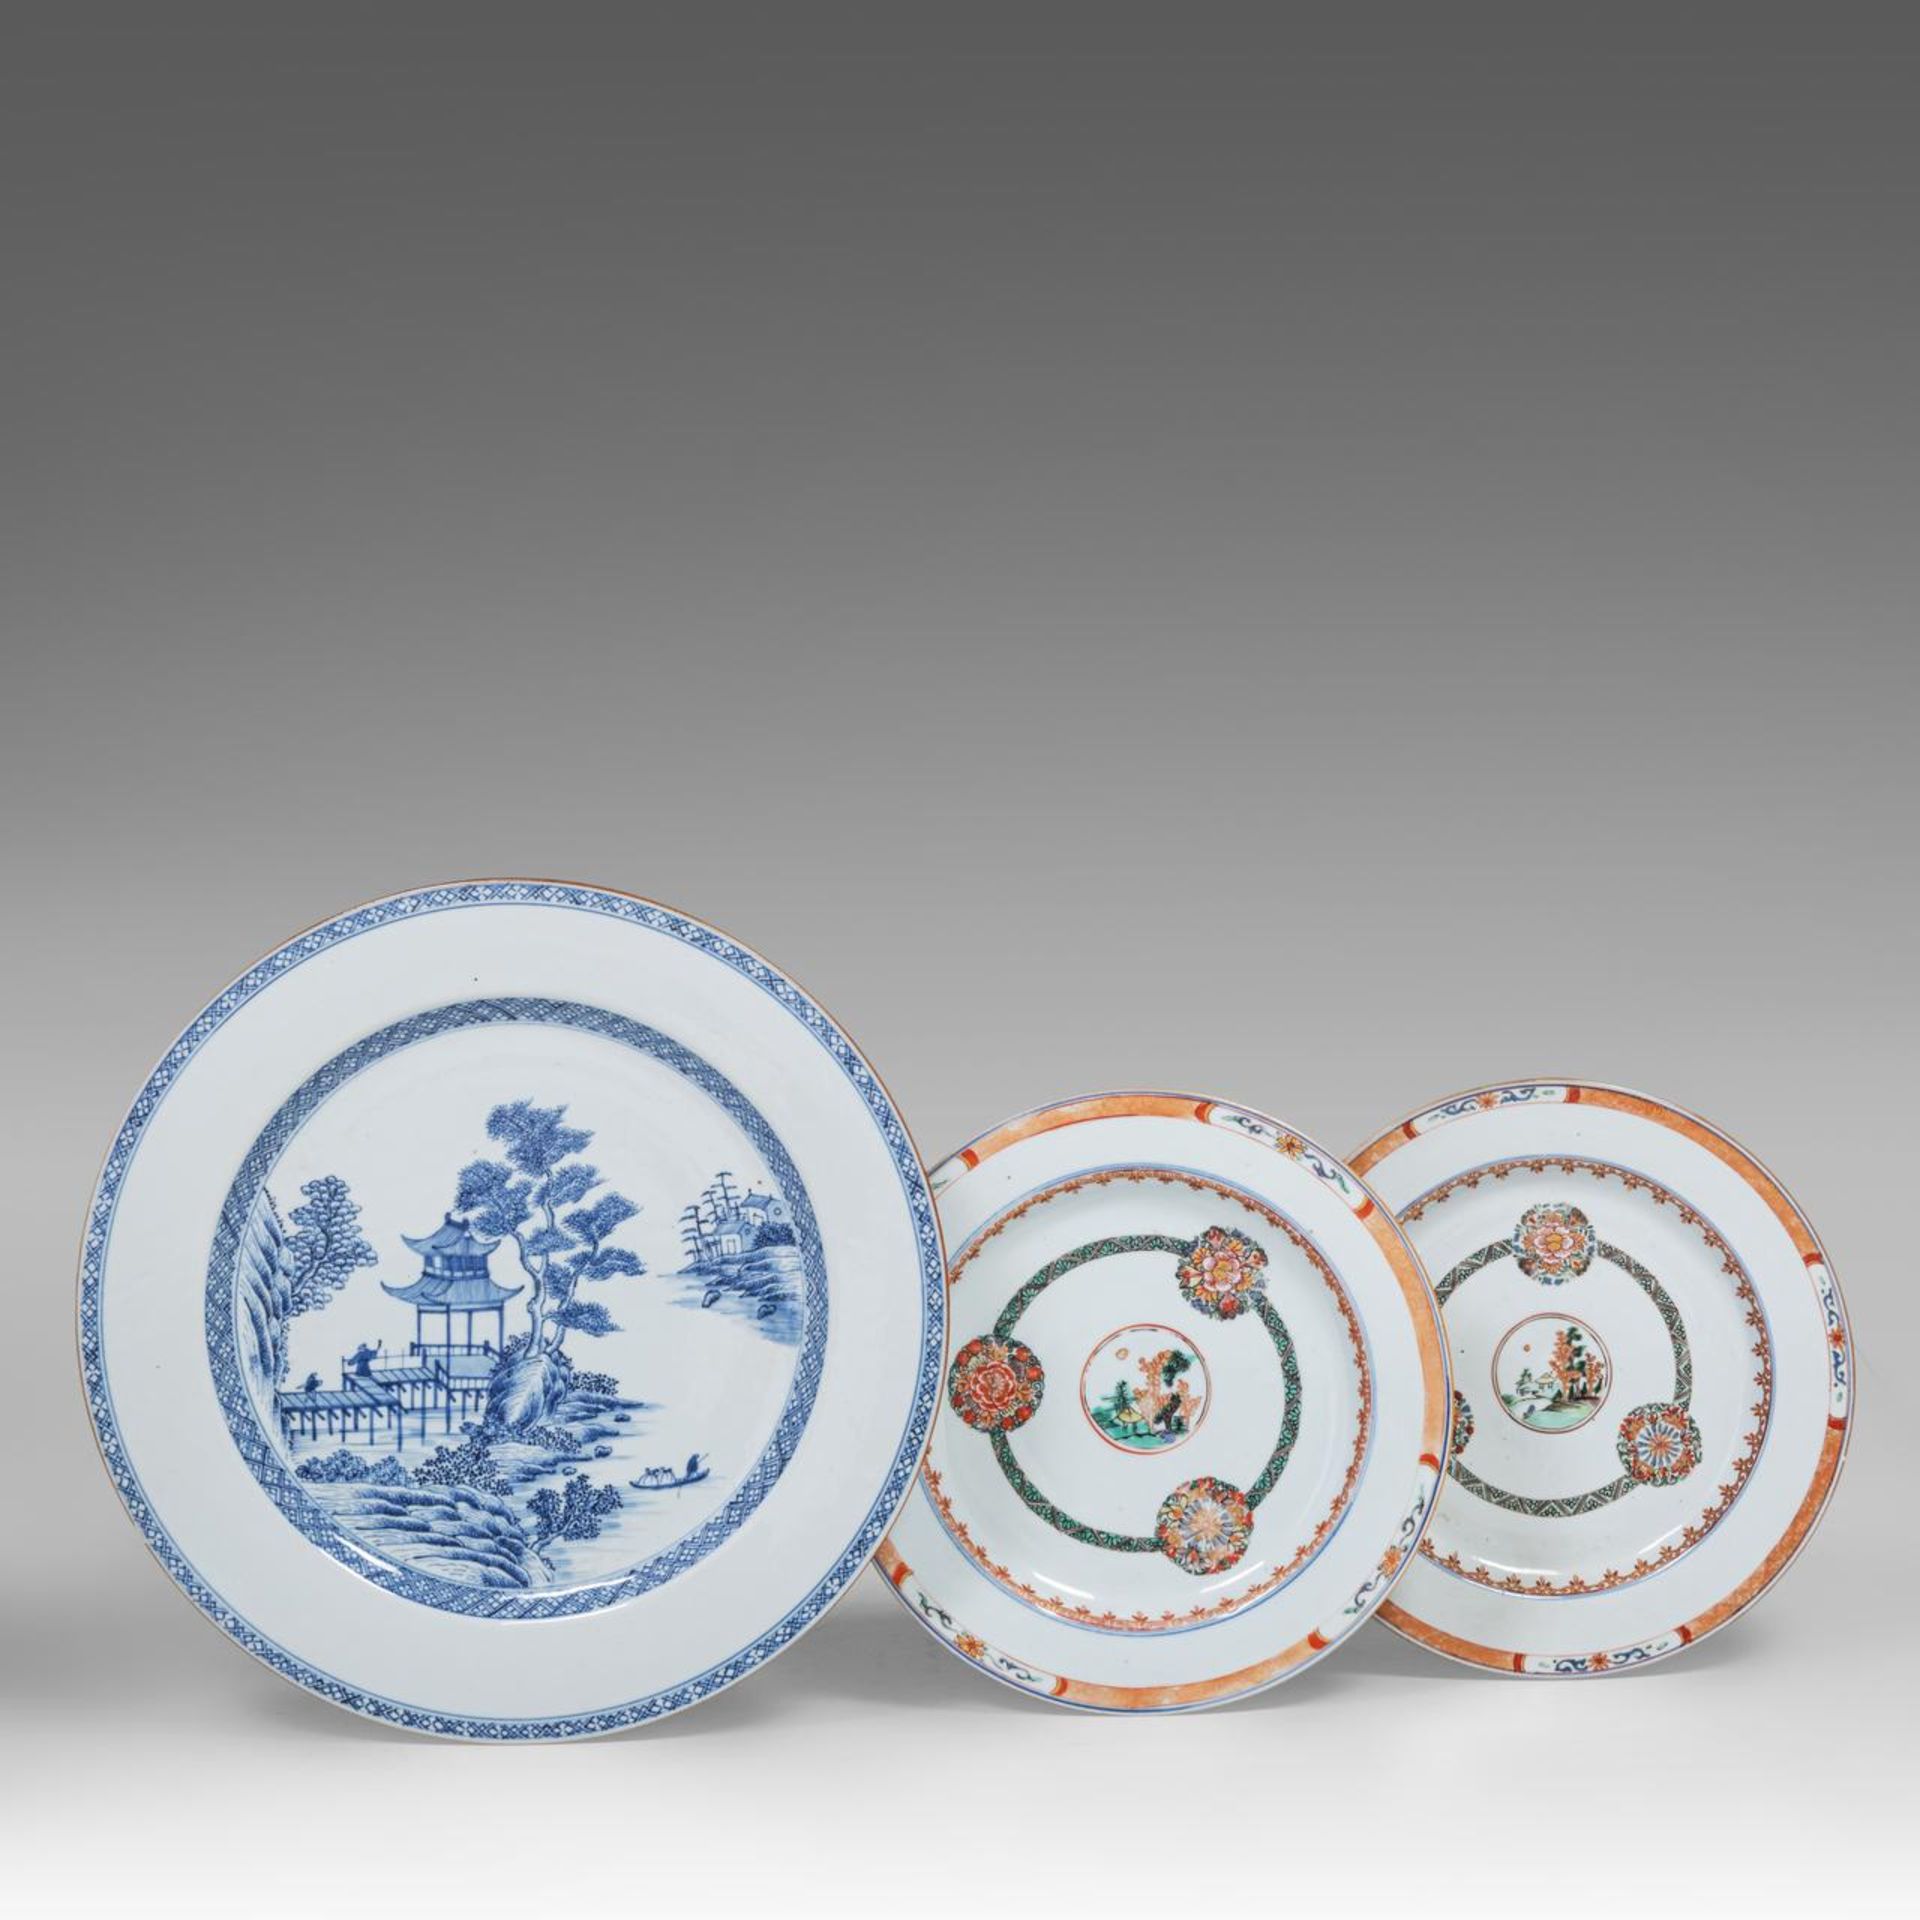 A Chinese blue and white 'Figures and pavilions in a riverscape' large plate, 18thC, dia 39 cm - add